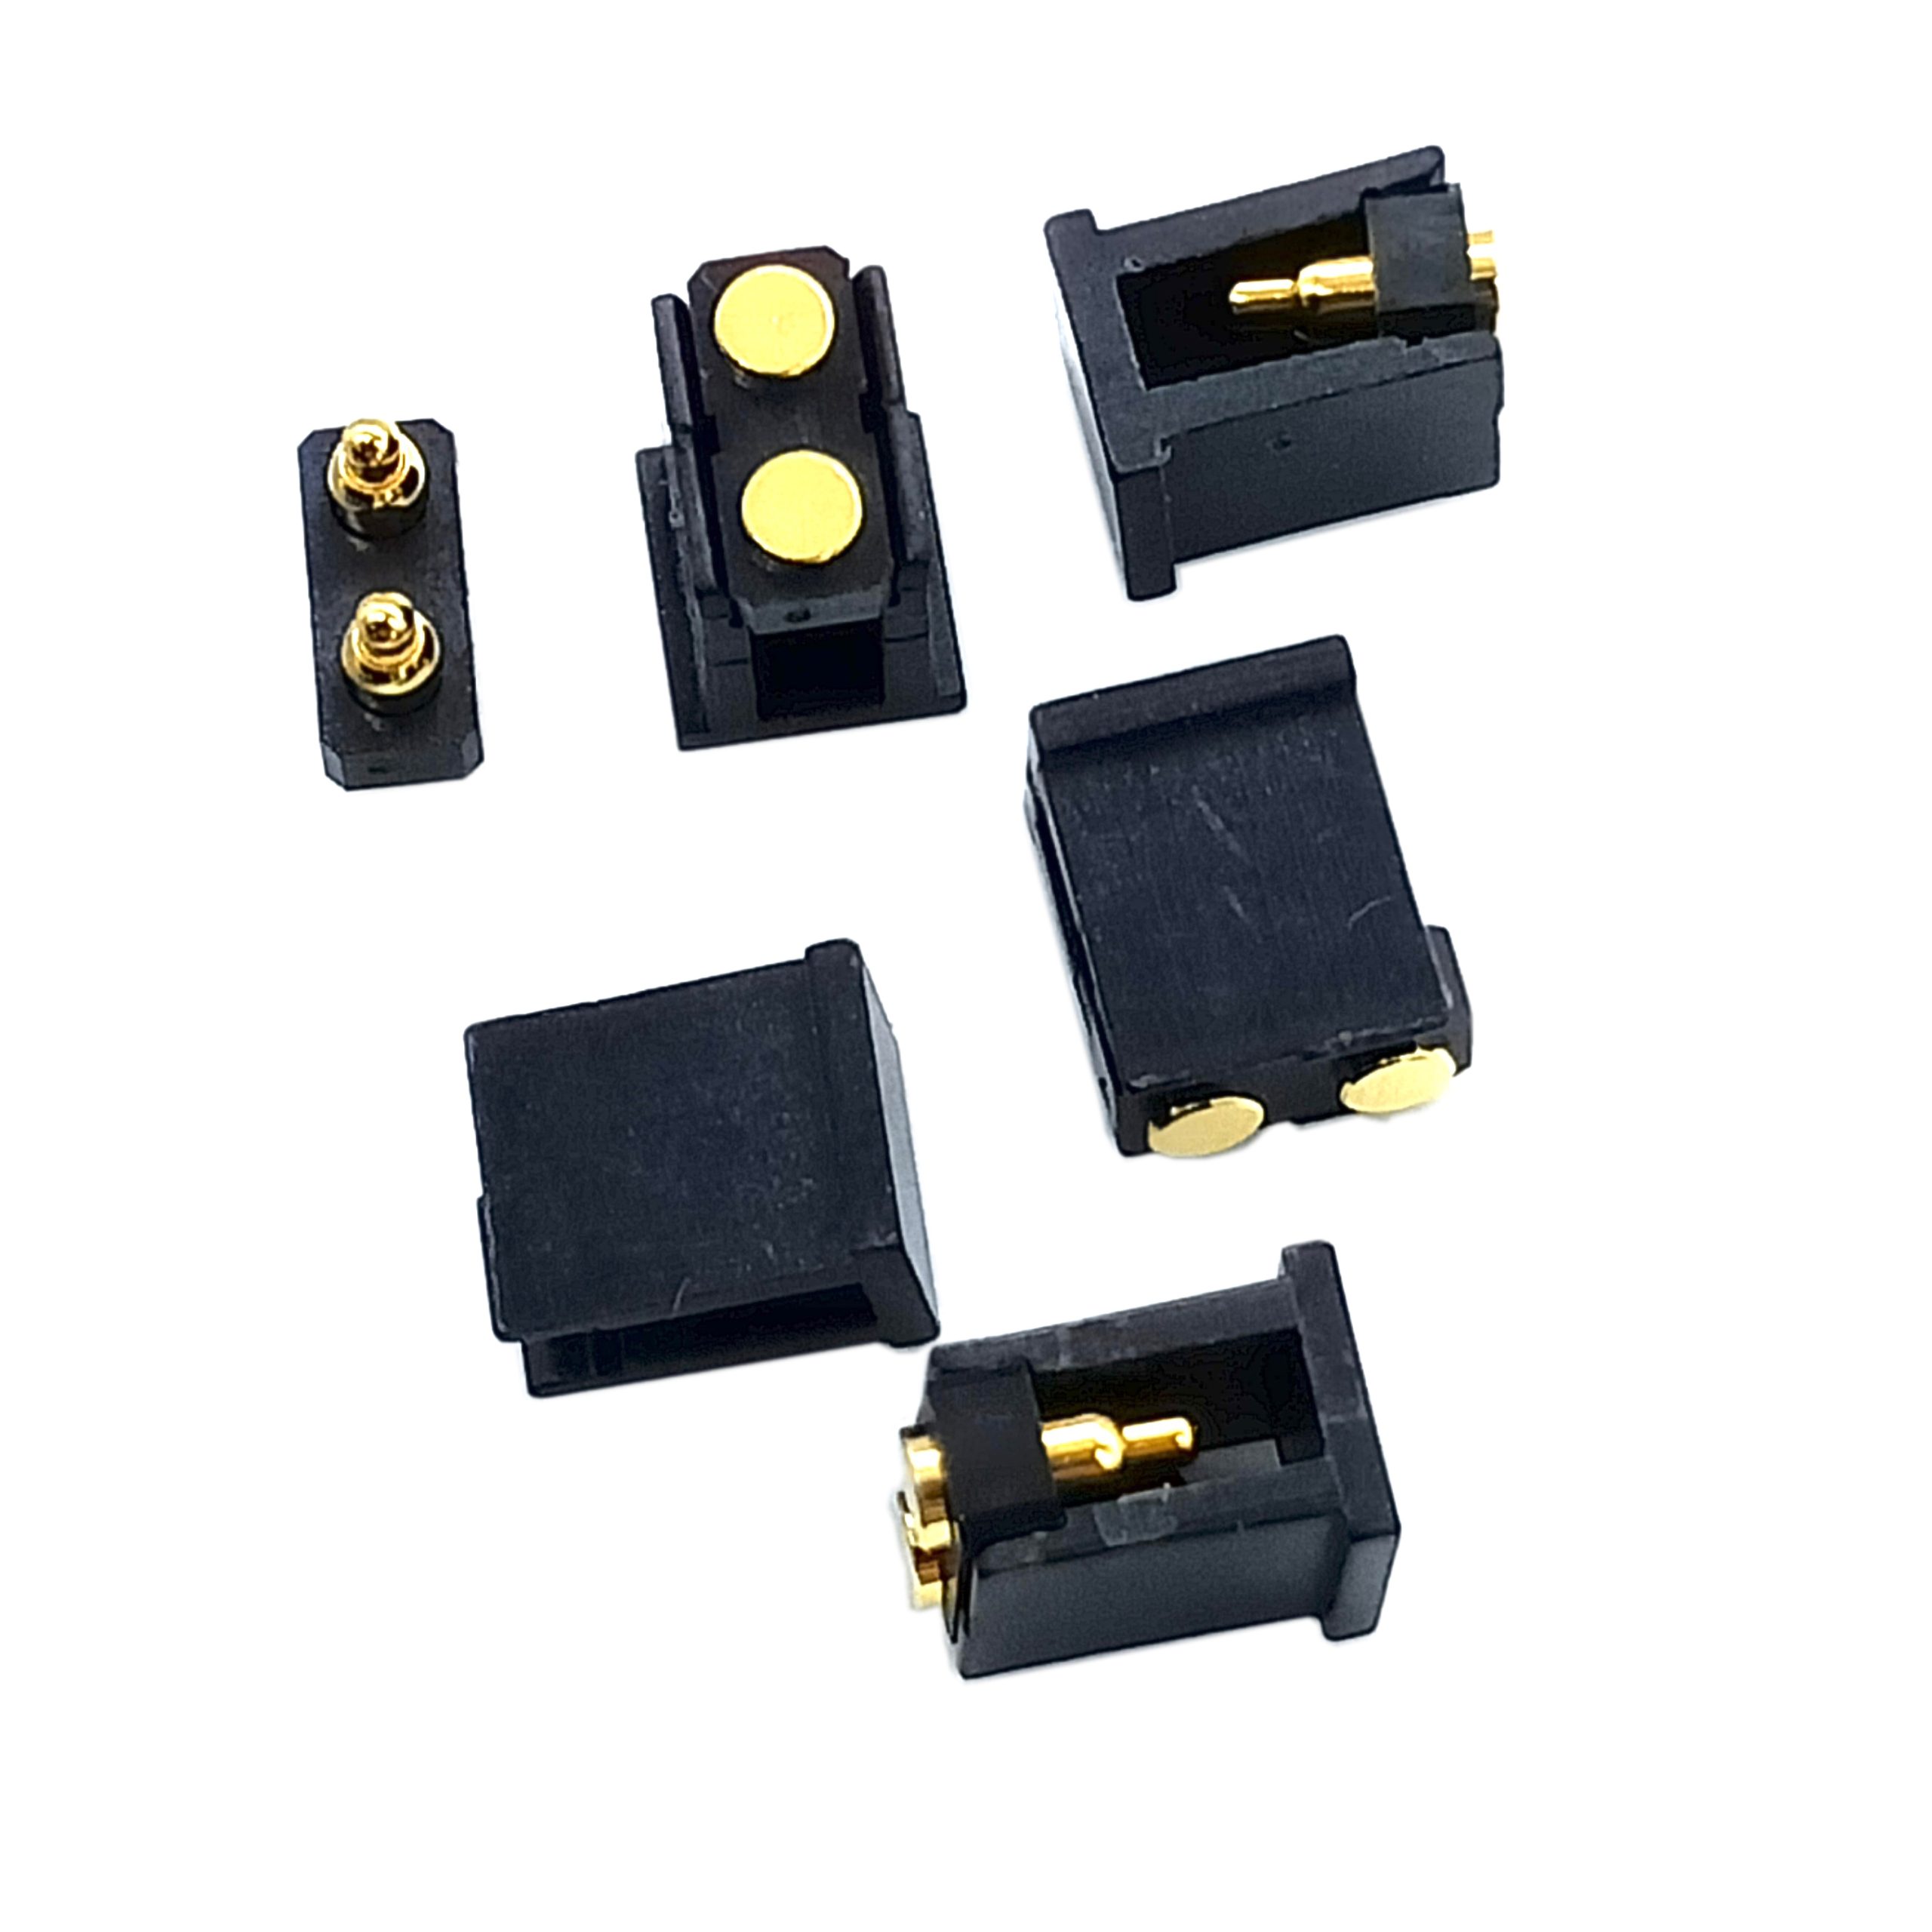 spring-loaded power connector is an electrical connector designed for the secure and reliable transmission of electrical power. 